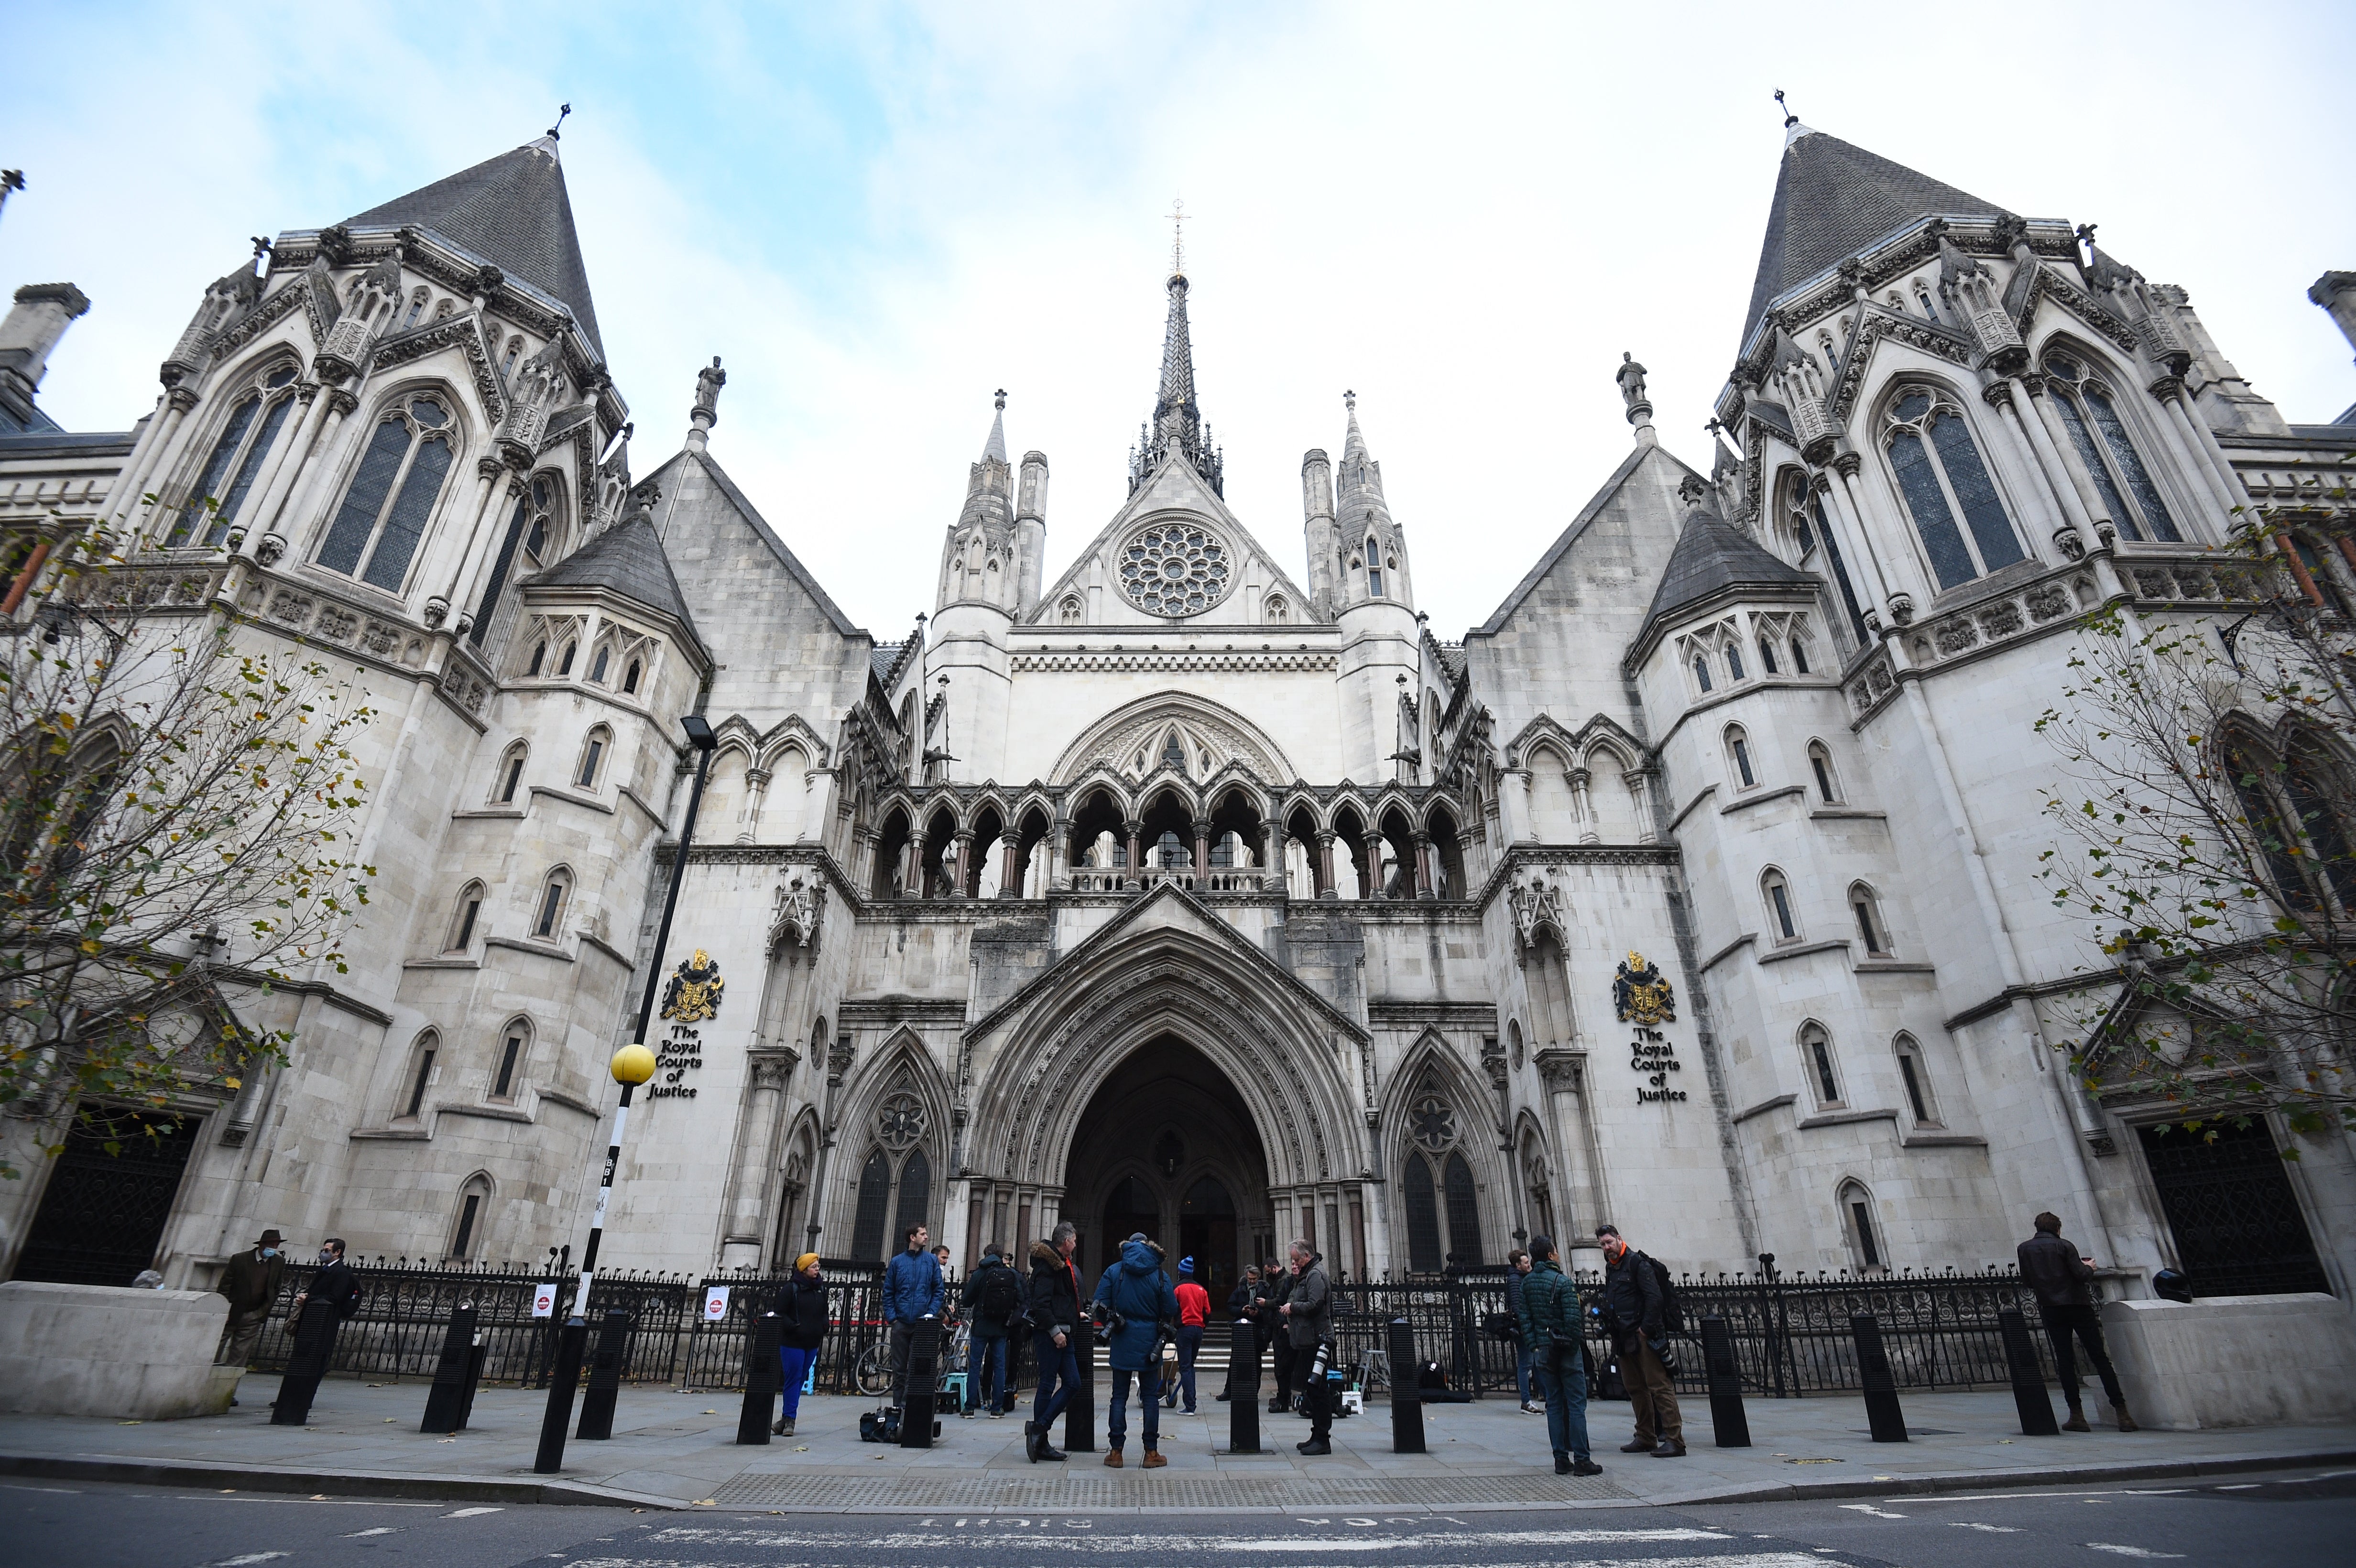 The hearing took place in London’s High Court, where the trial is also due to be held